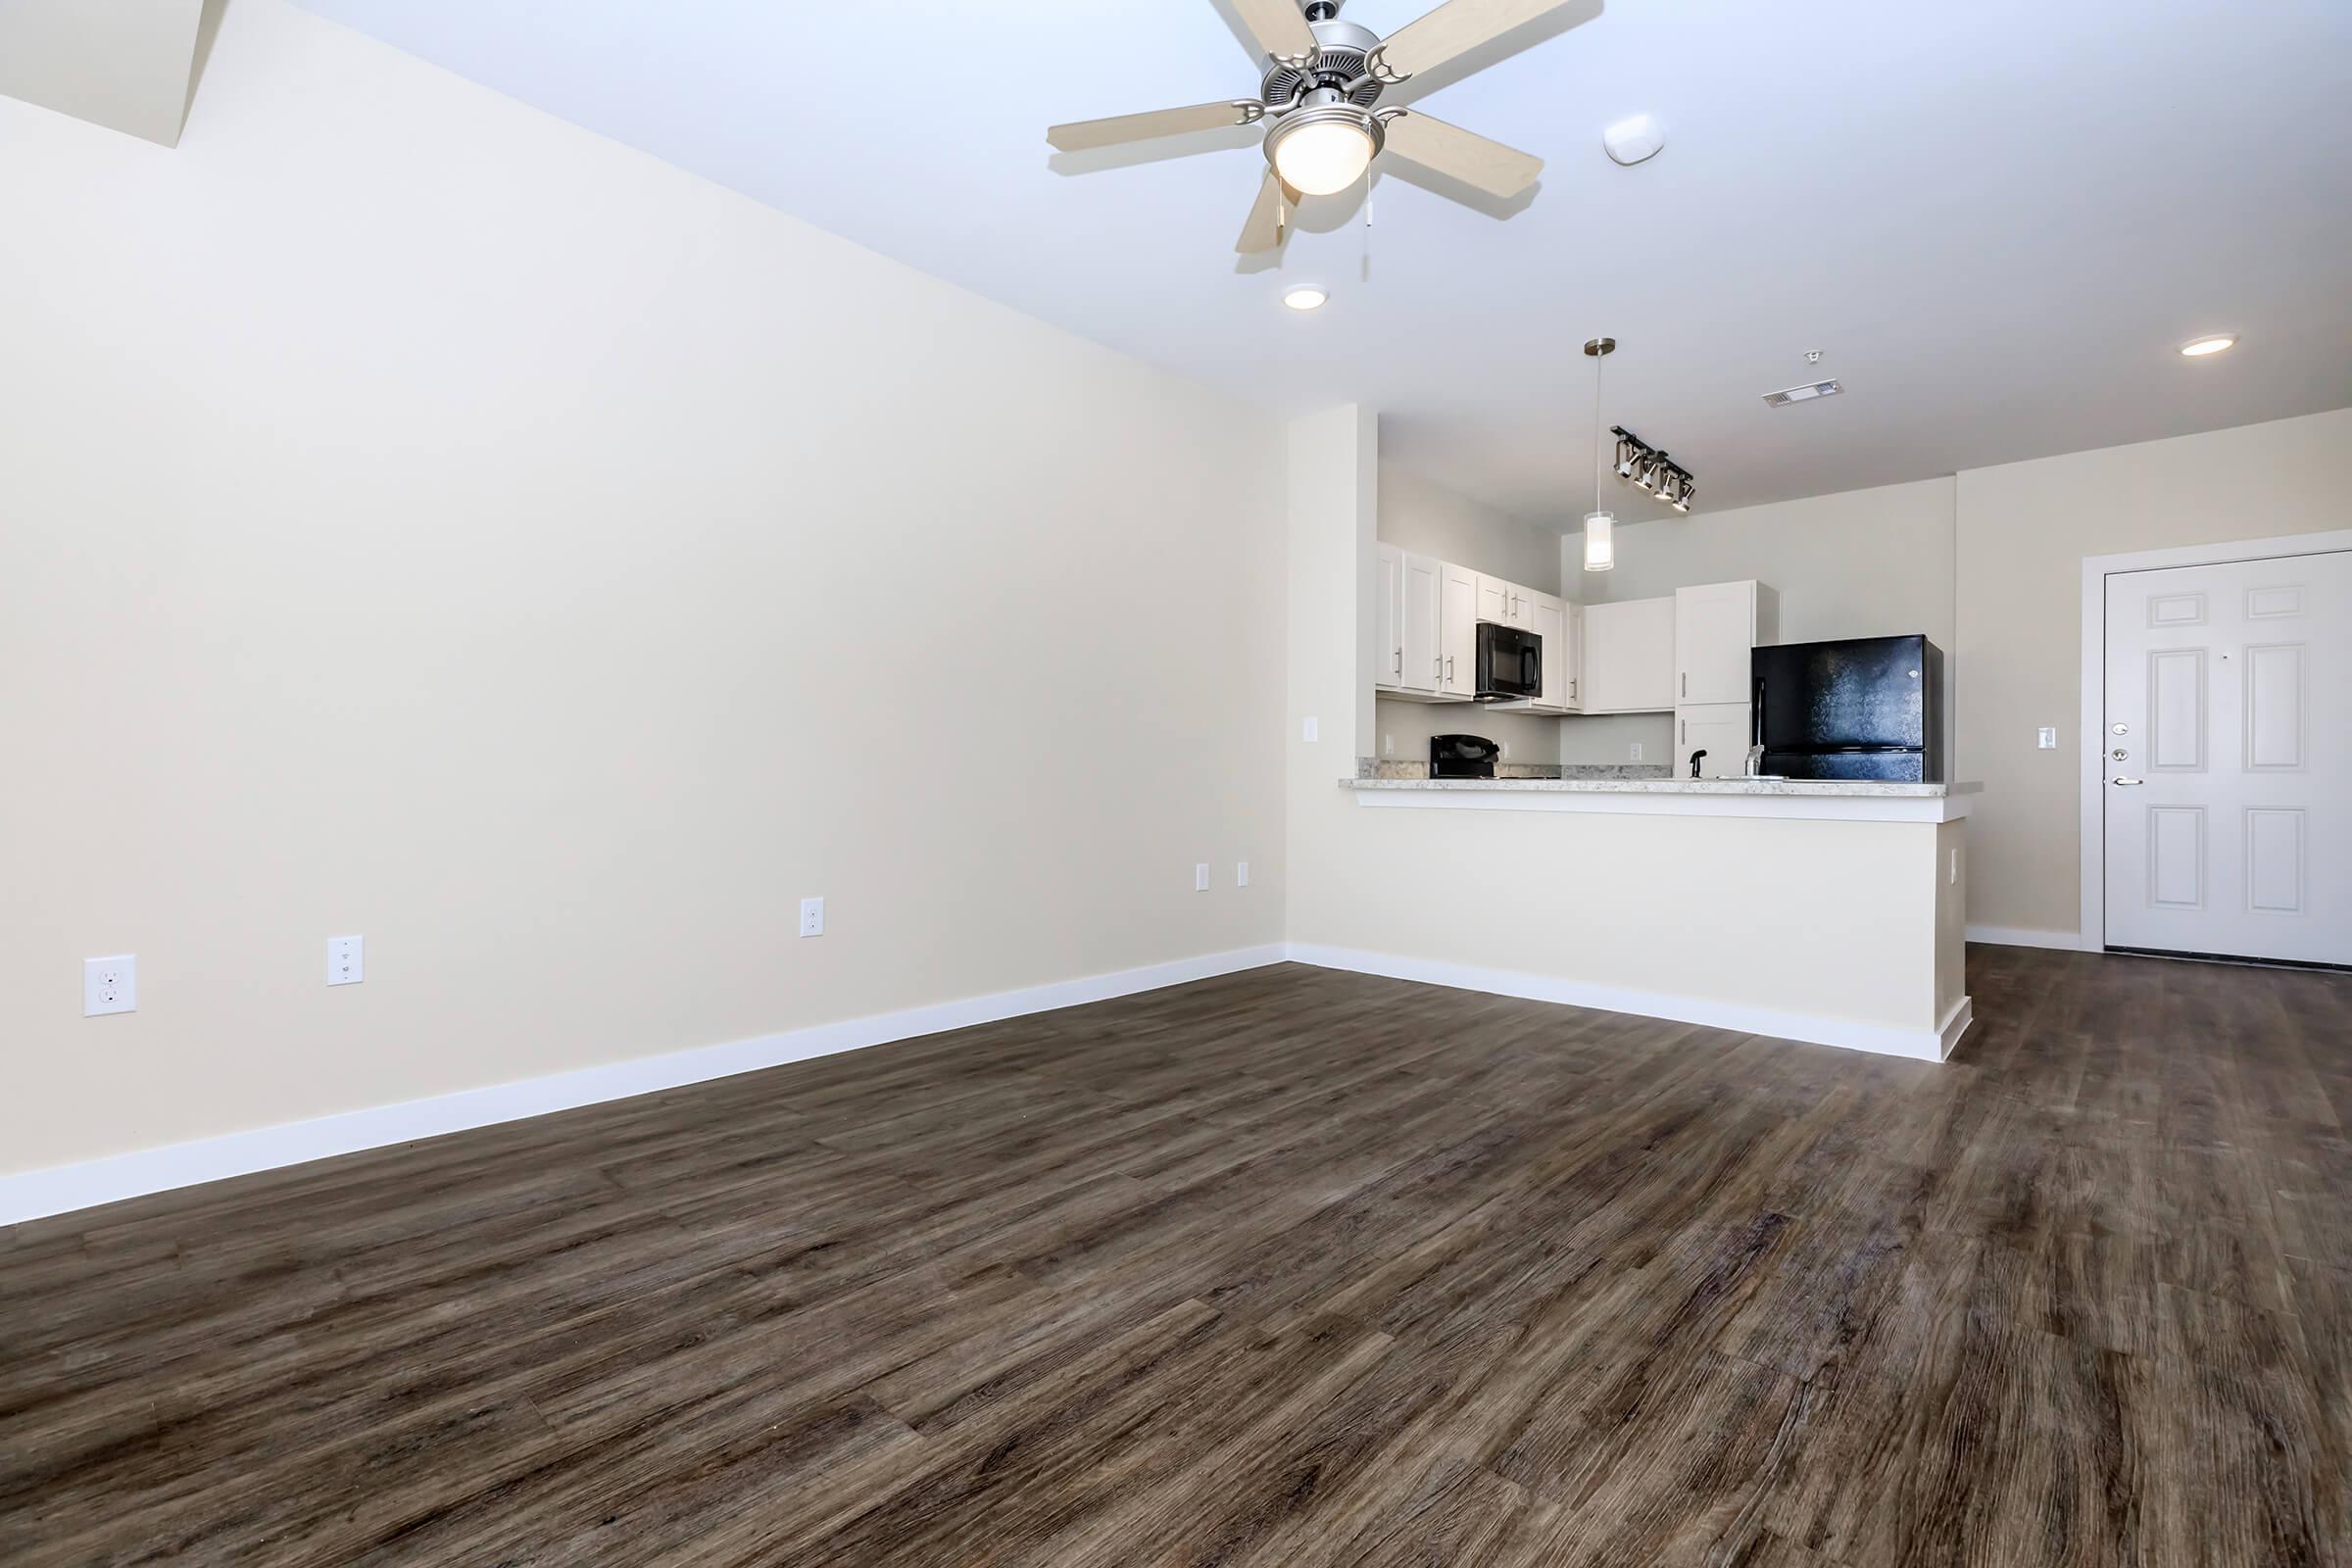 Apartments for Rent in Leander TX - Hills at Leander Spacious Floor Plans with Plenty of Features and Fully Equipped with Kitchens, and Much More